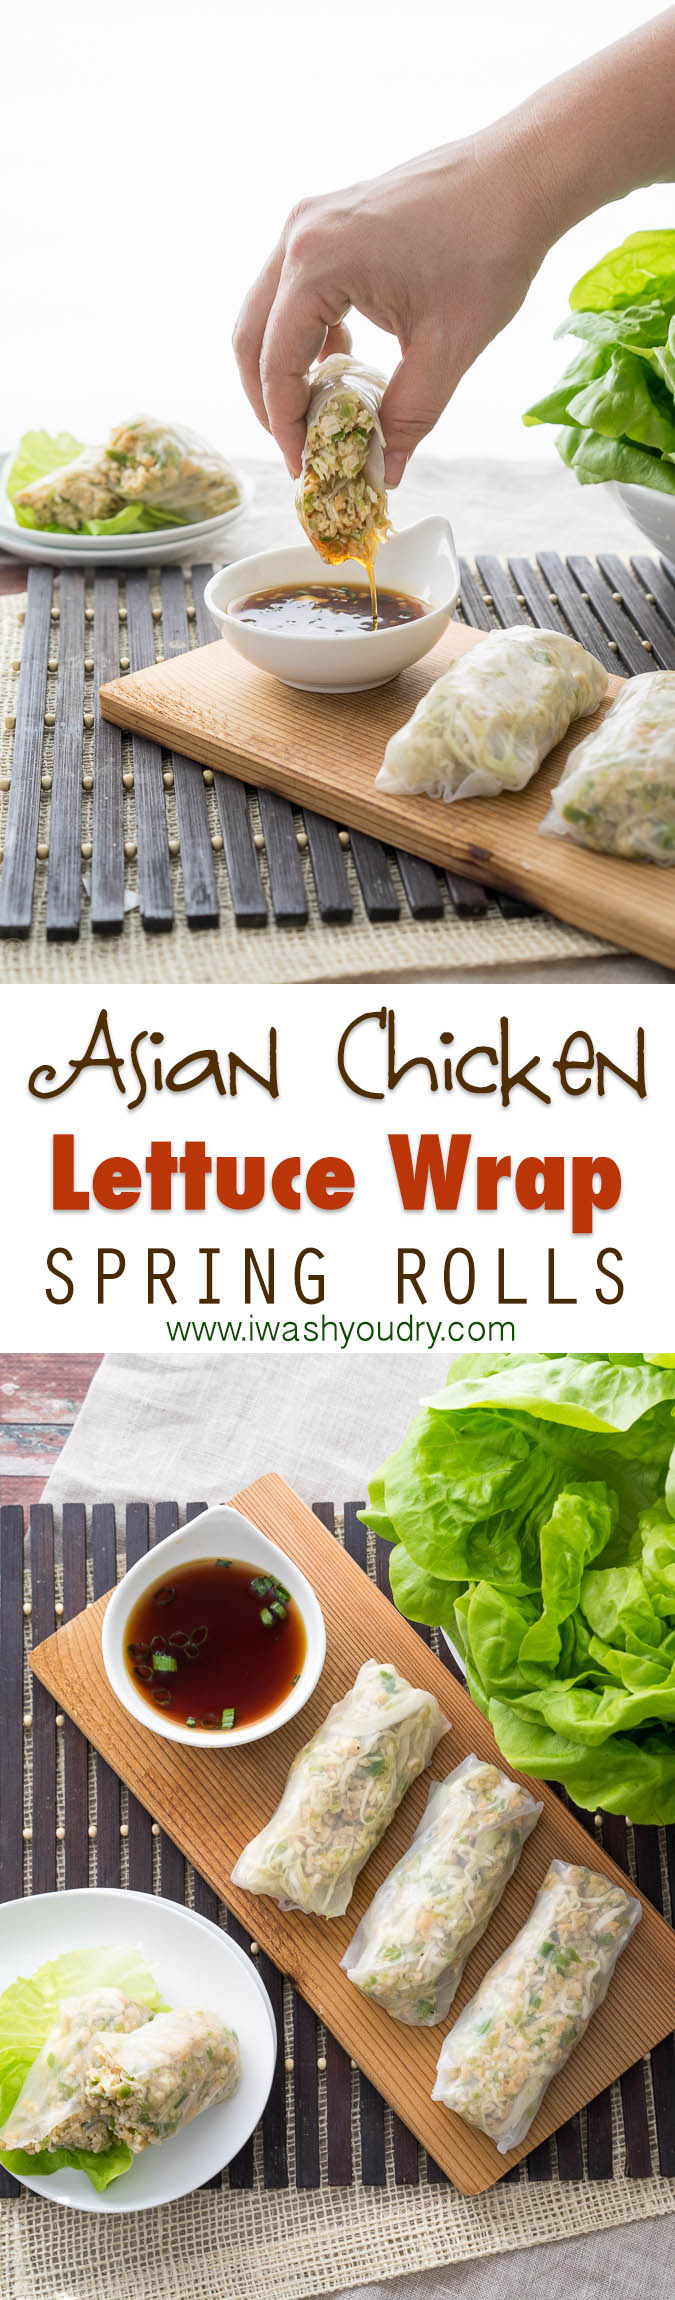 Fresh and easy! Asian Chicken Lettuce Wraps in a Spring Roll wrapper!